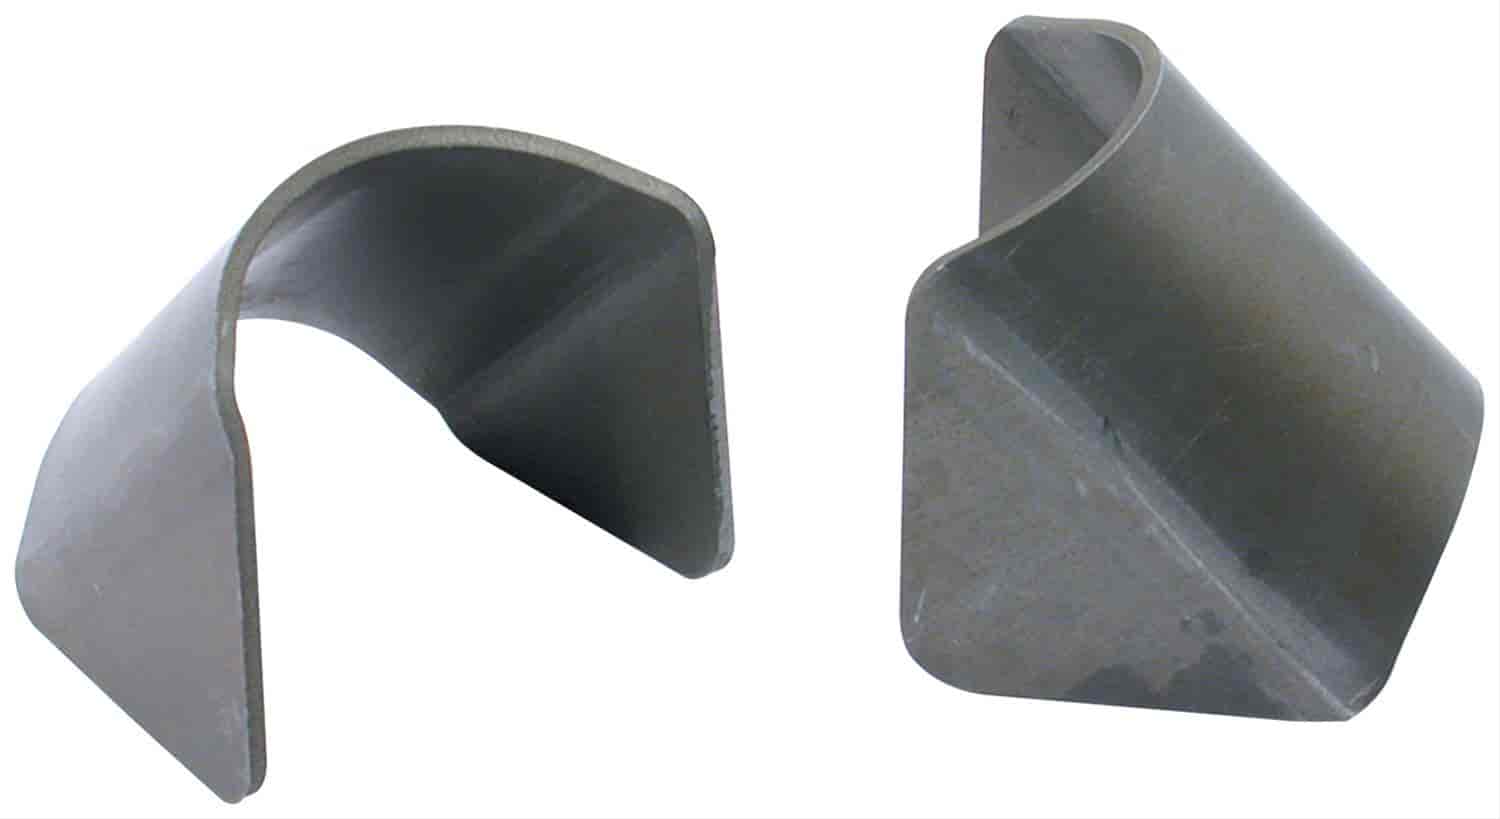 Wrap Around Mild Steel Gussets Fits 1-1/2" to 1-3/4" Diameter Tube